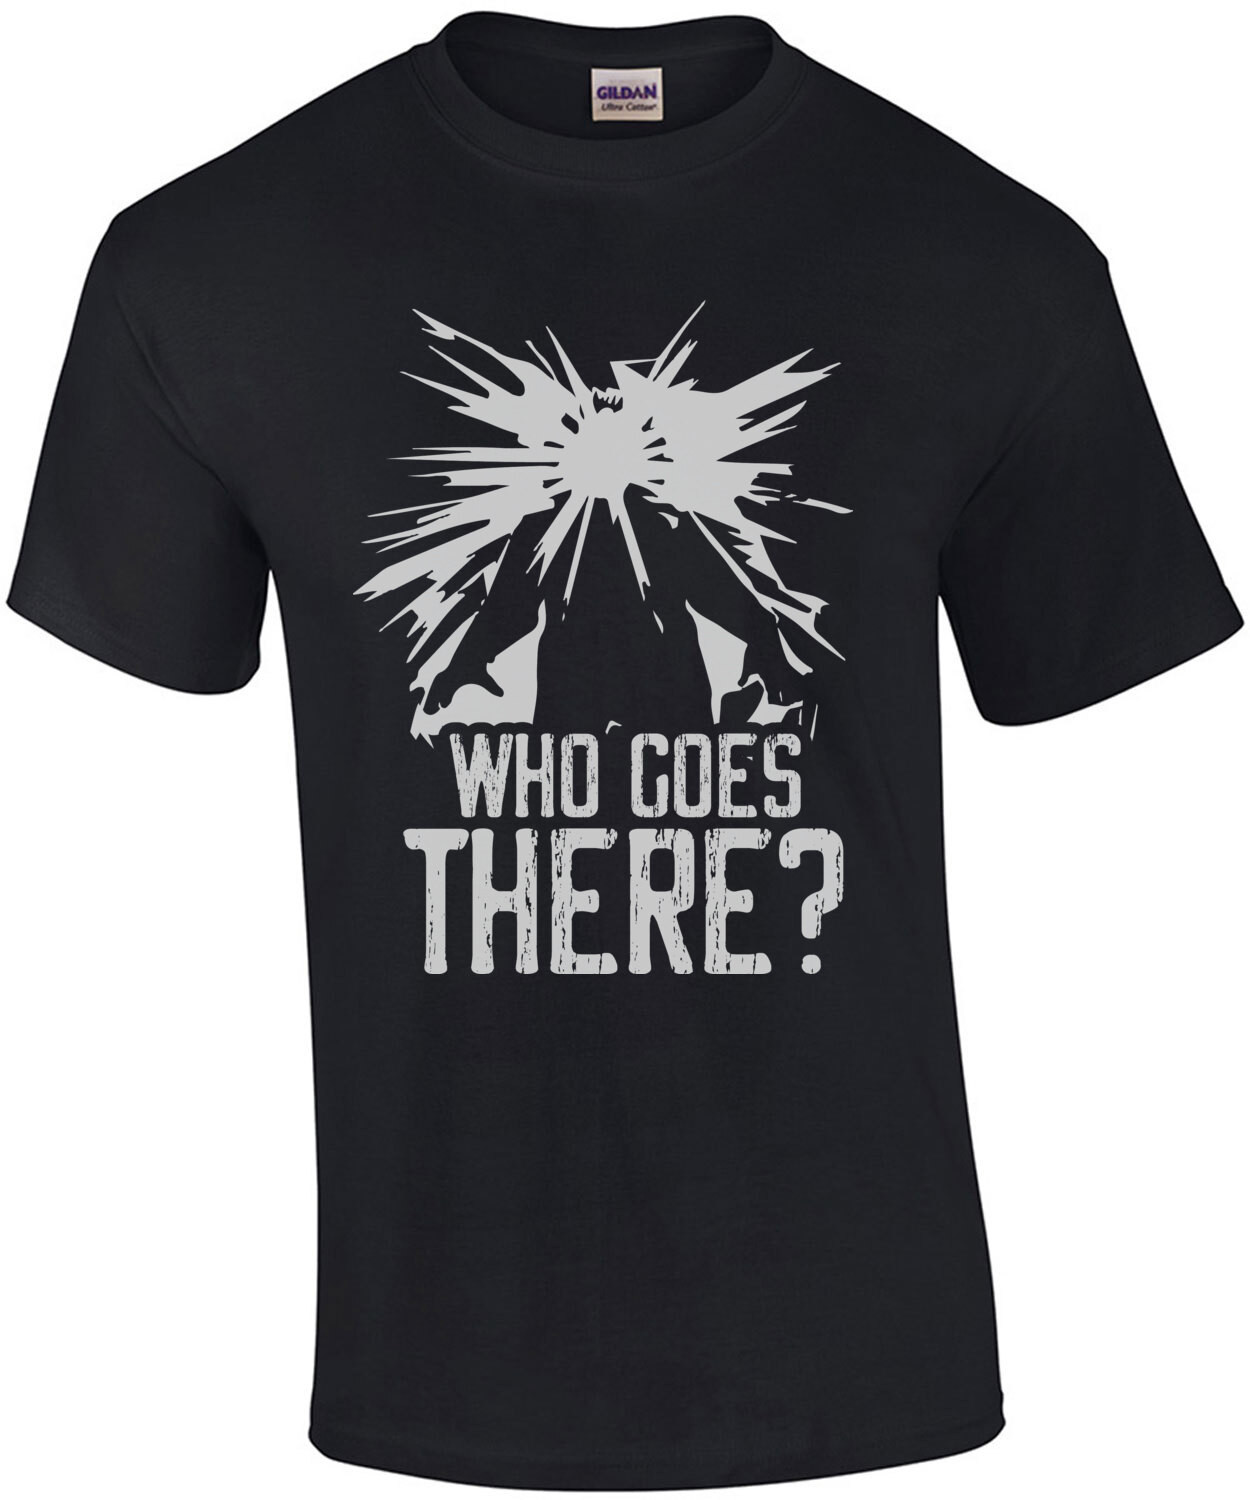 Who goes there? - The Thing - 80's T-Shirt